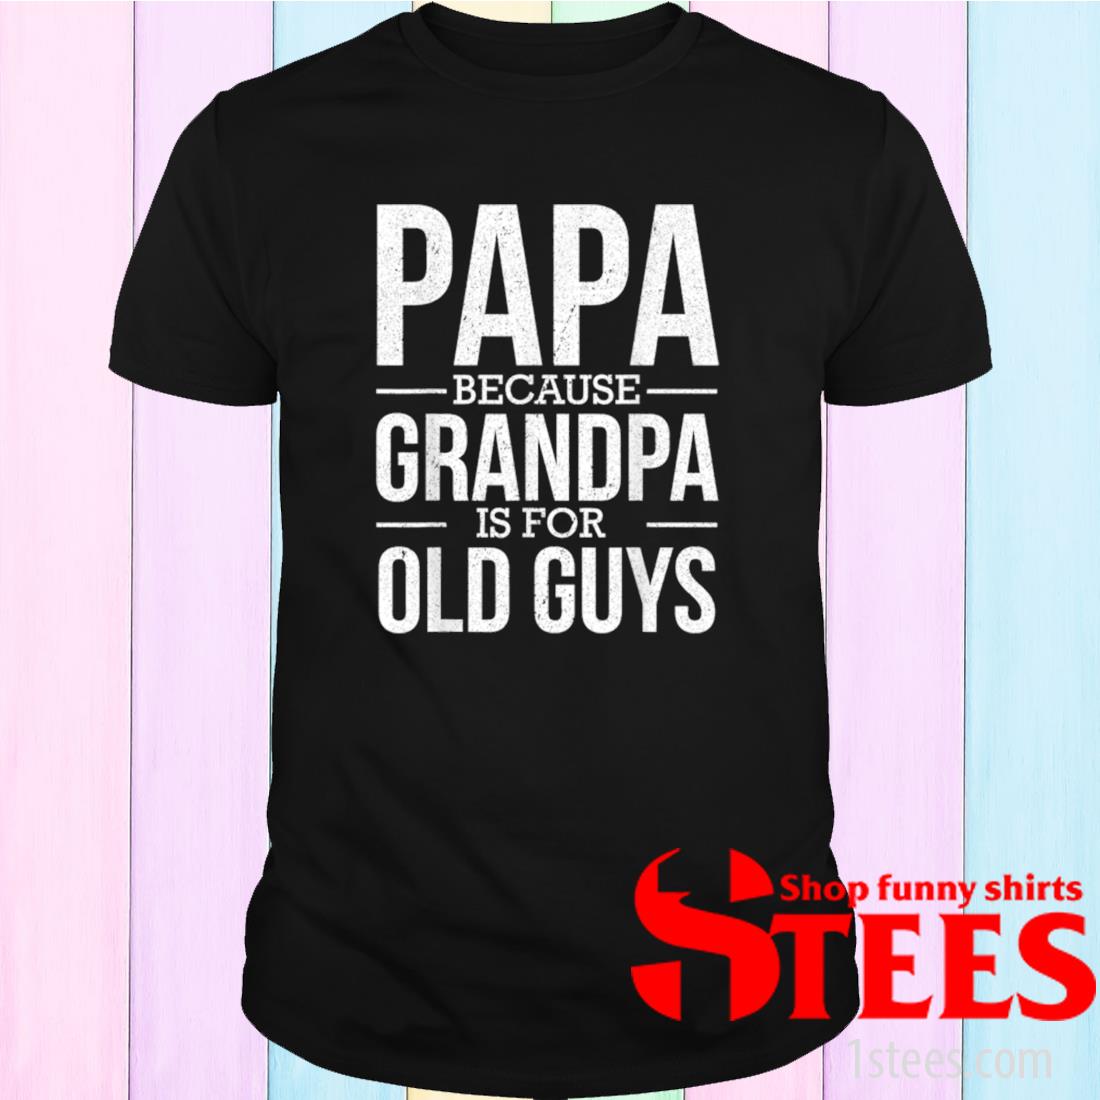 Download Men S Papa Because Grandpa Is For Old Guys Father S Day Shirt 1stees